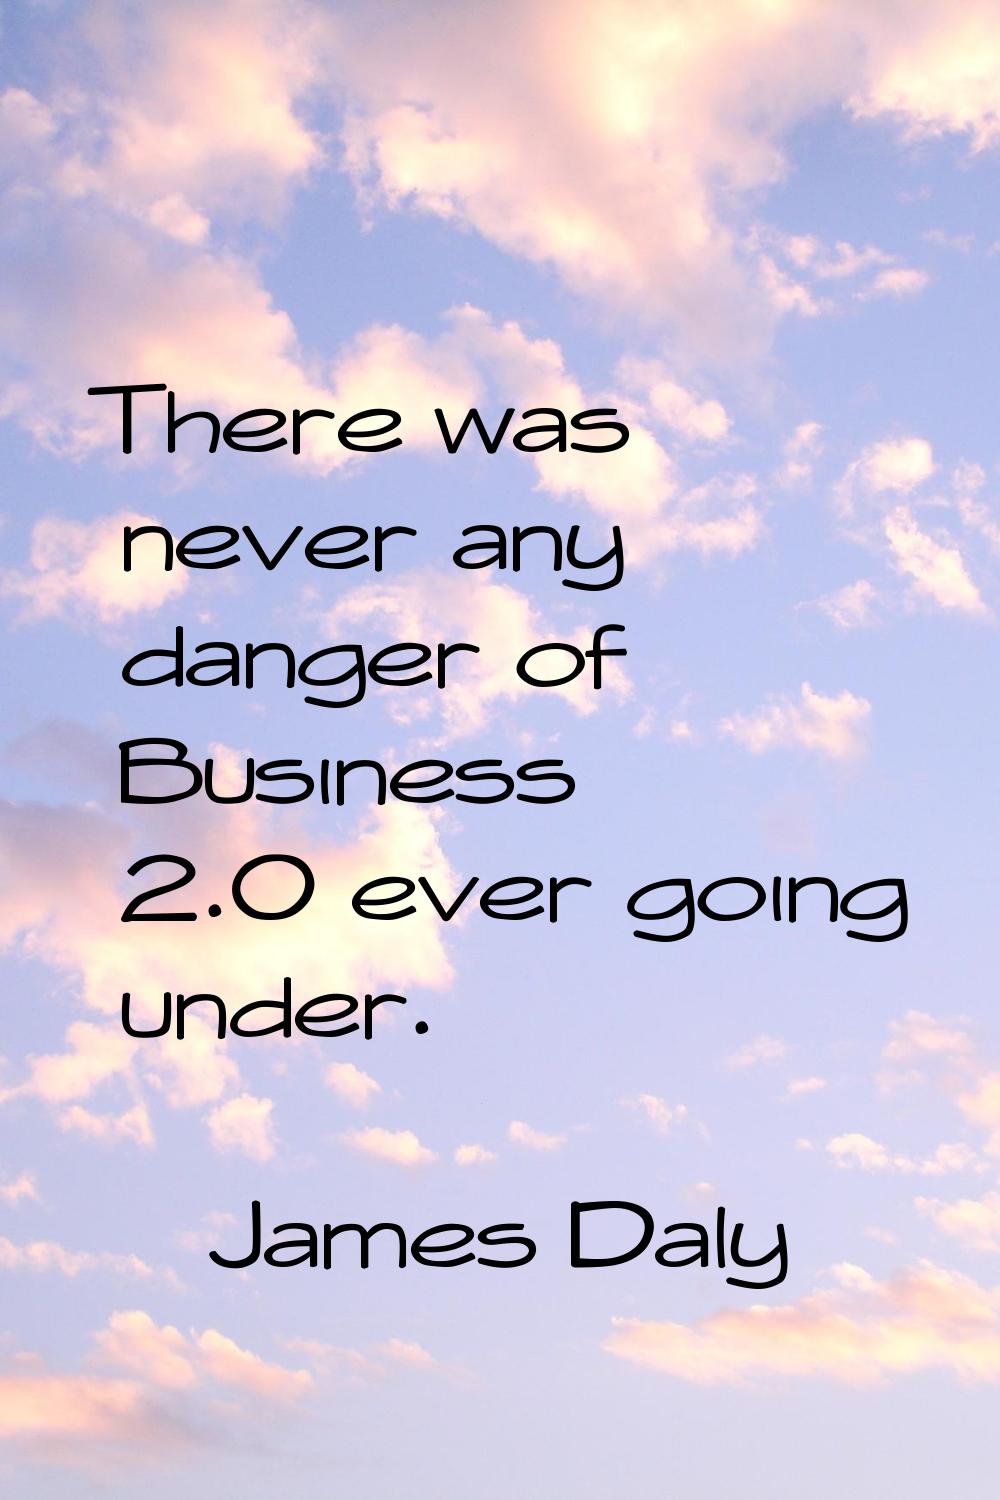 There was never any danger of Business 2.0 ever going under.